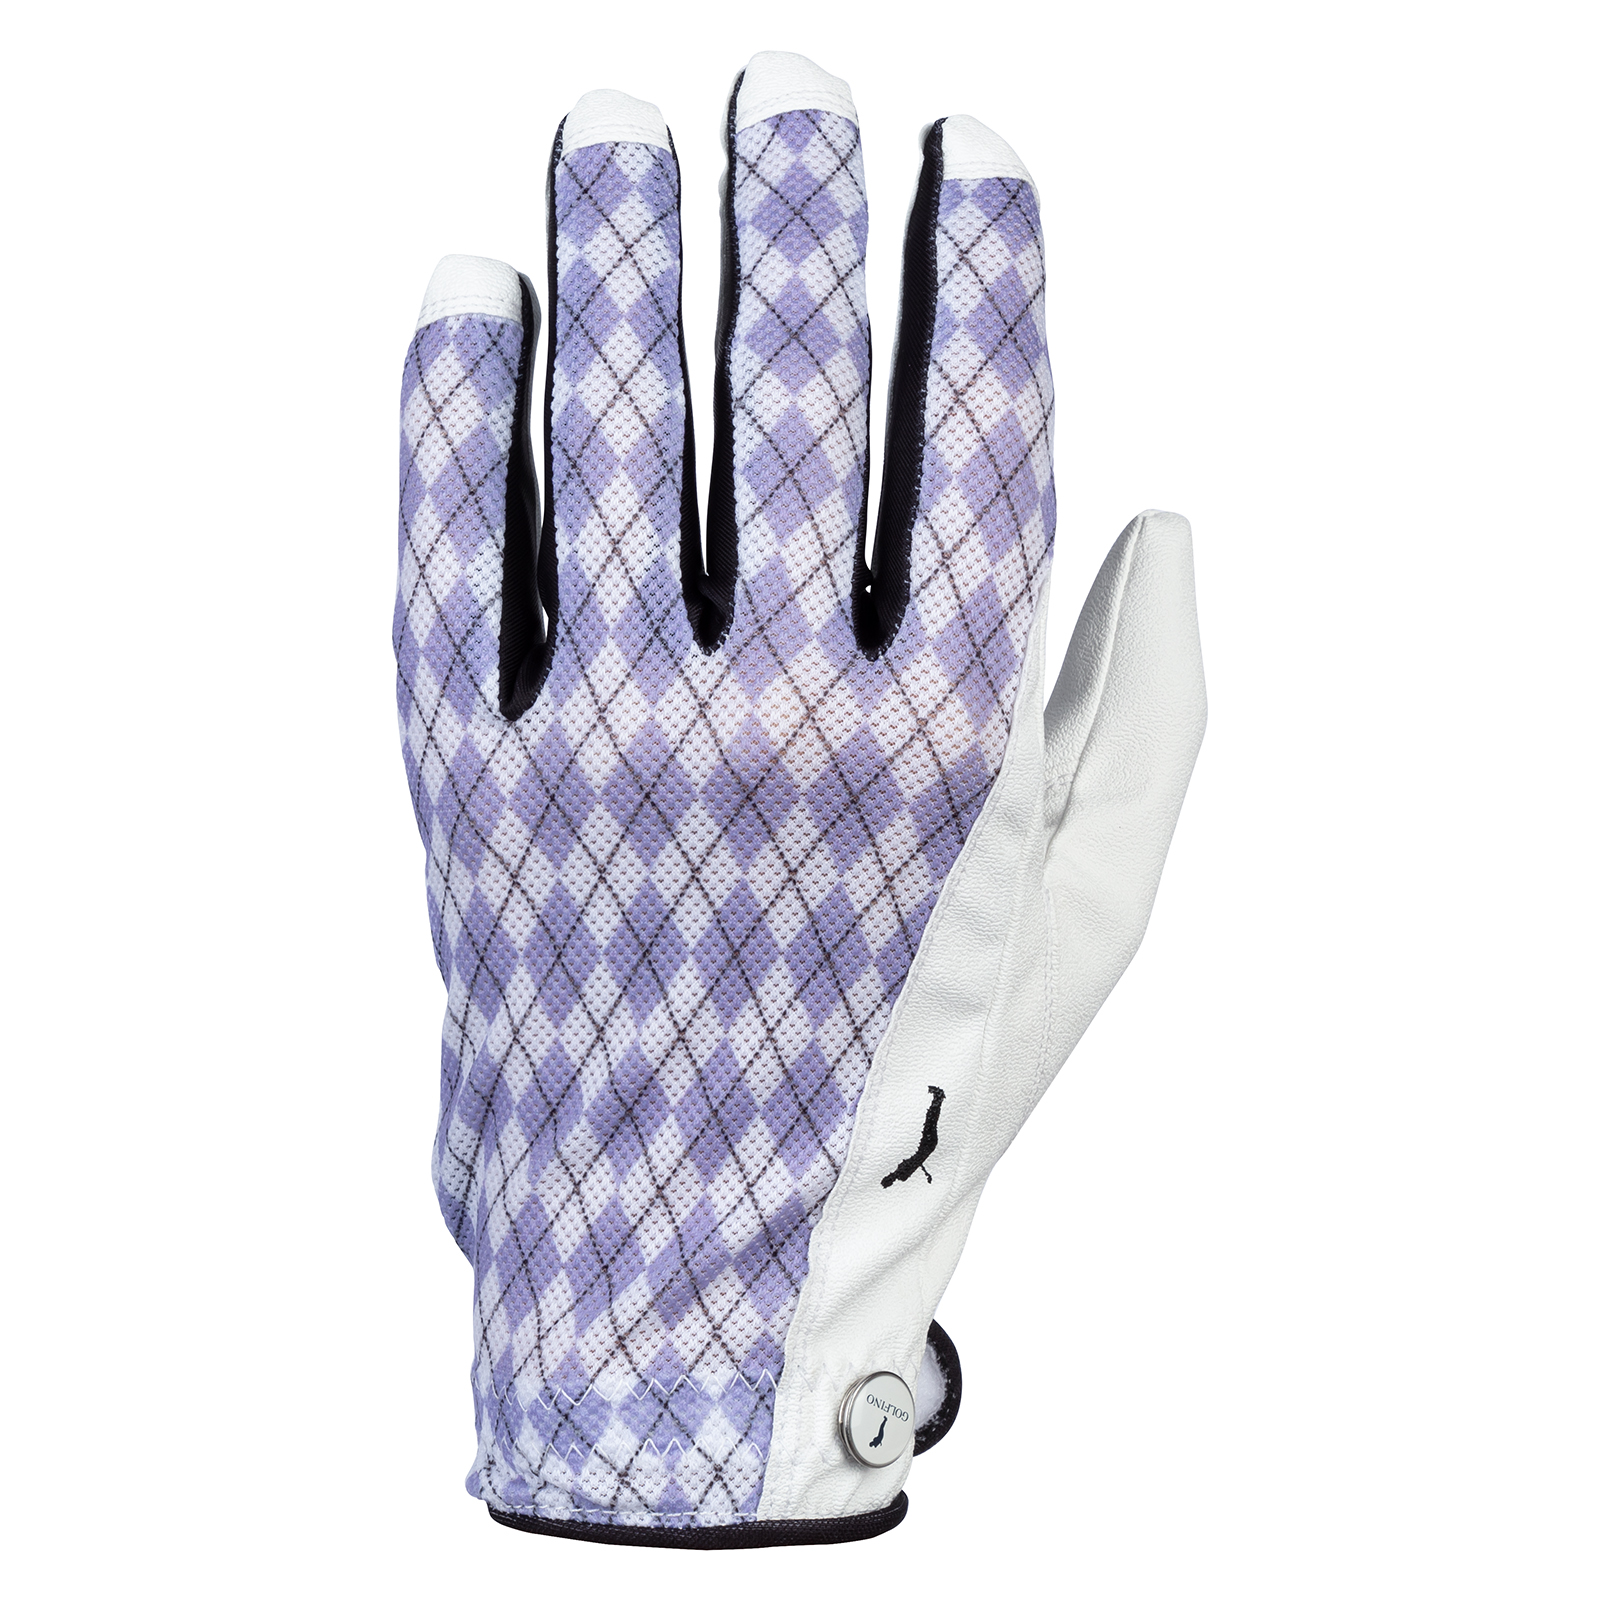 Ladies' left-hand golf glove made from vegan leather with argyle pattern 